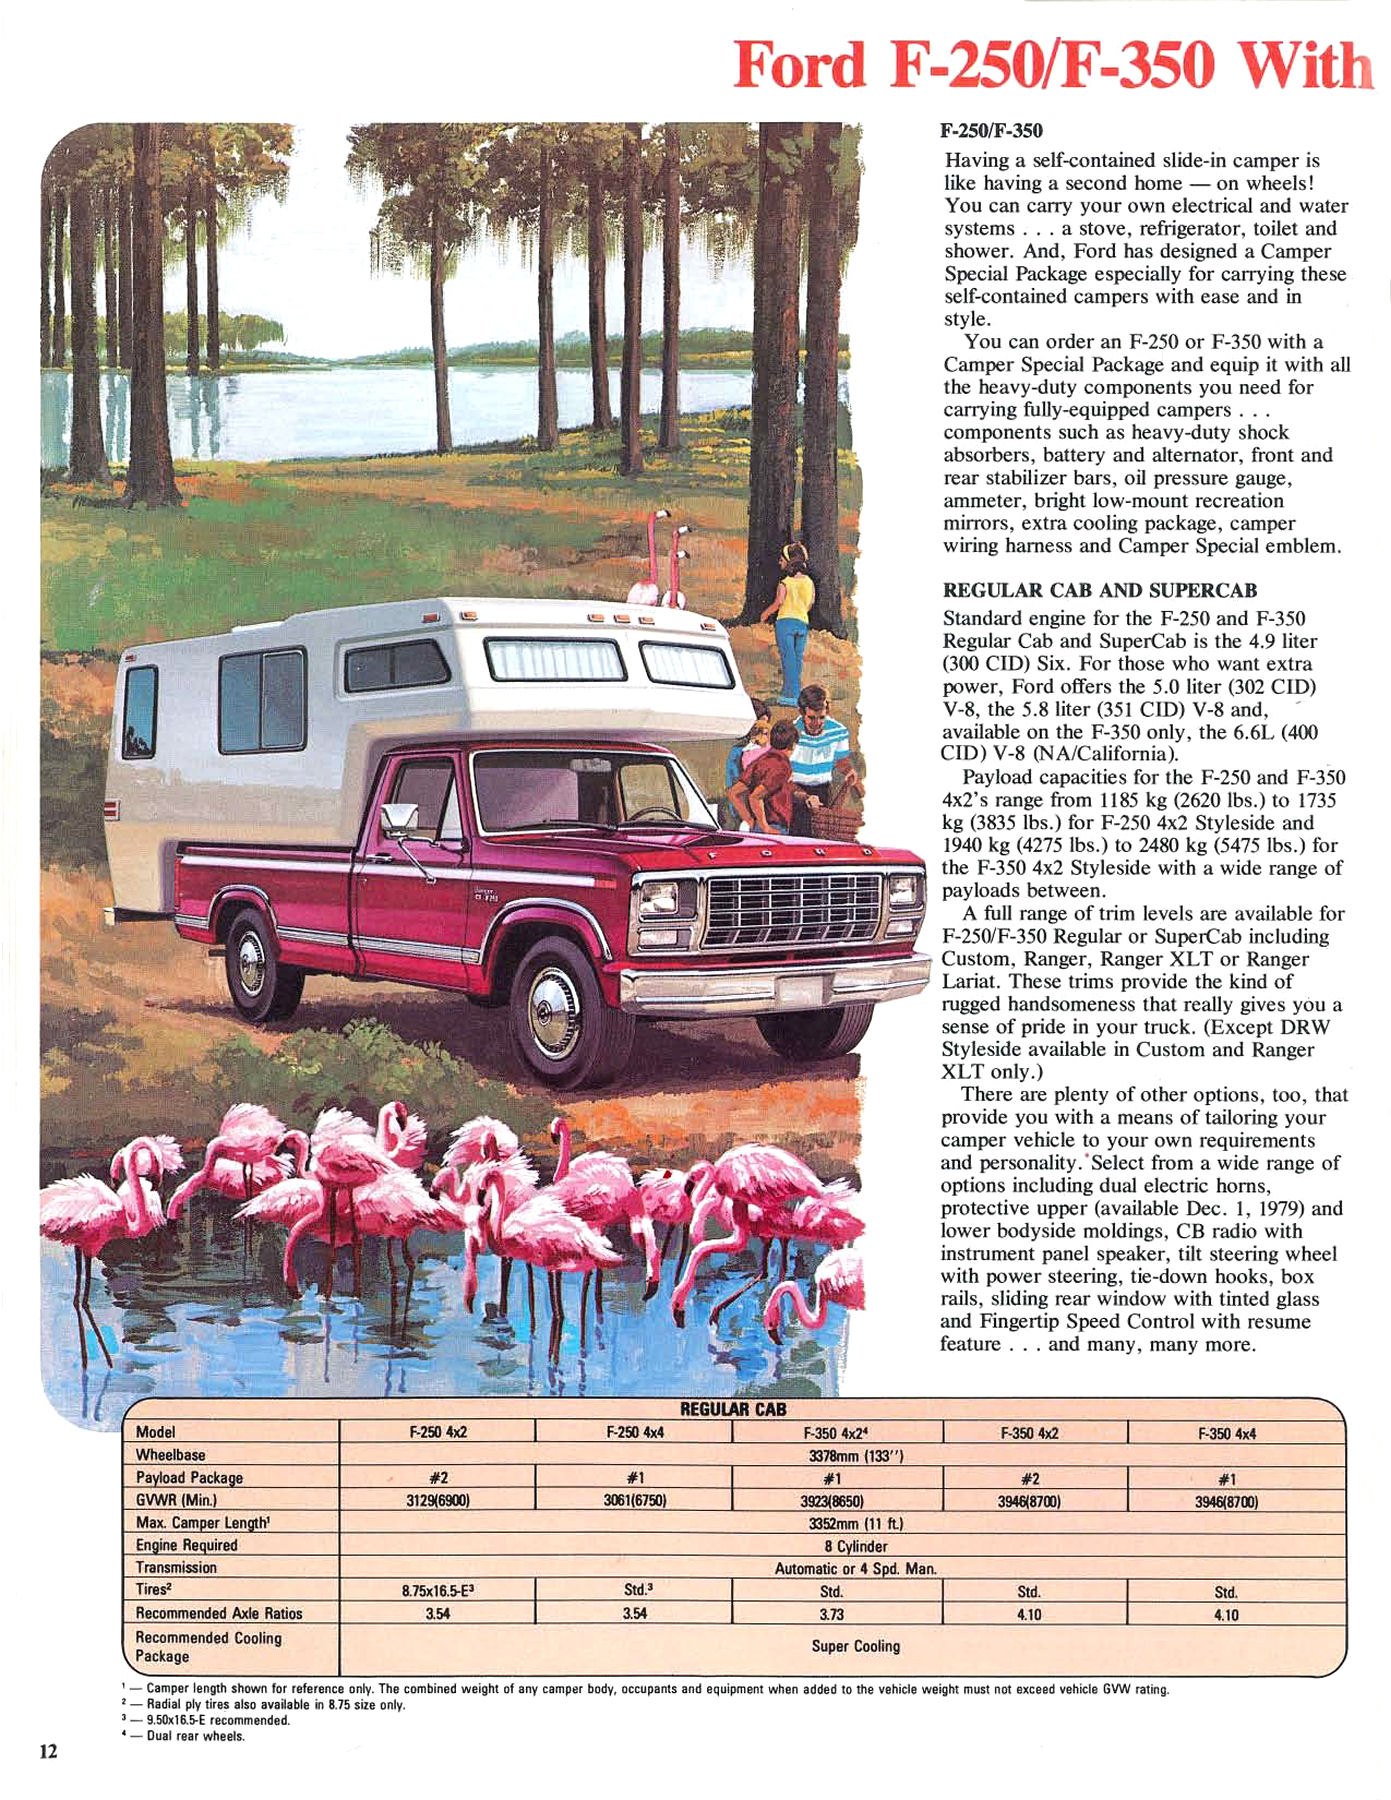 1980 Ford Recreation Vehicles-12